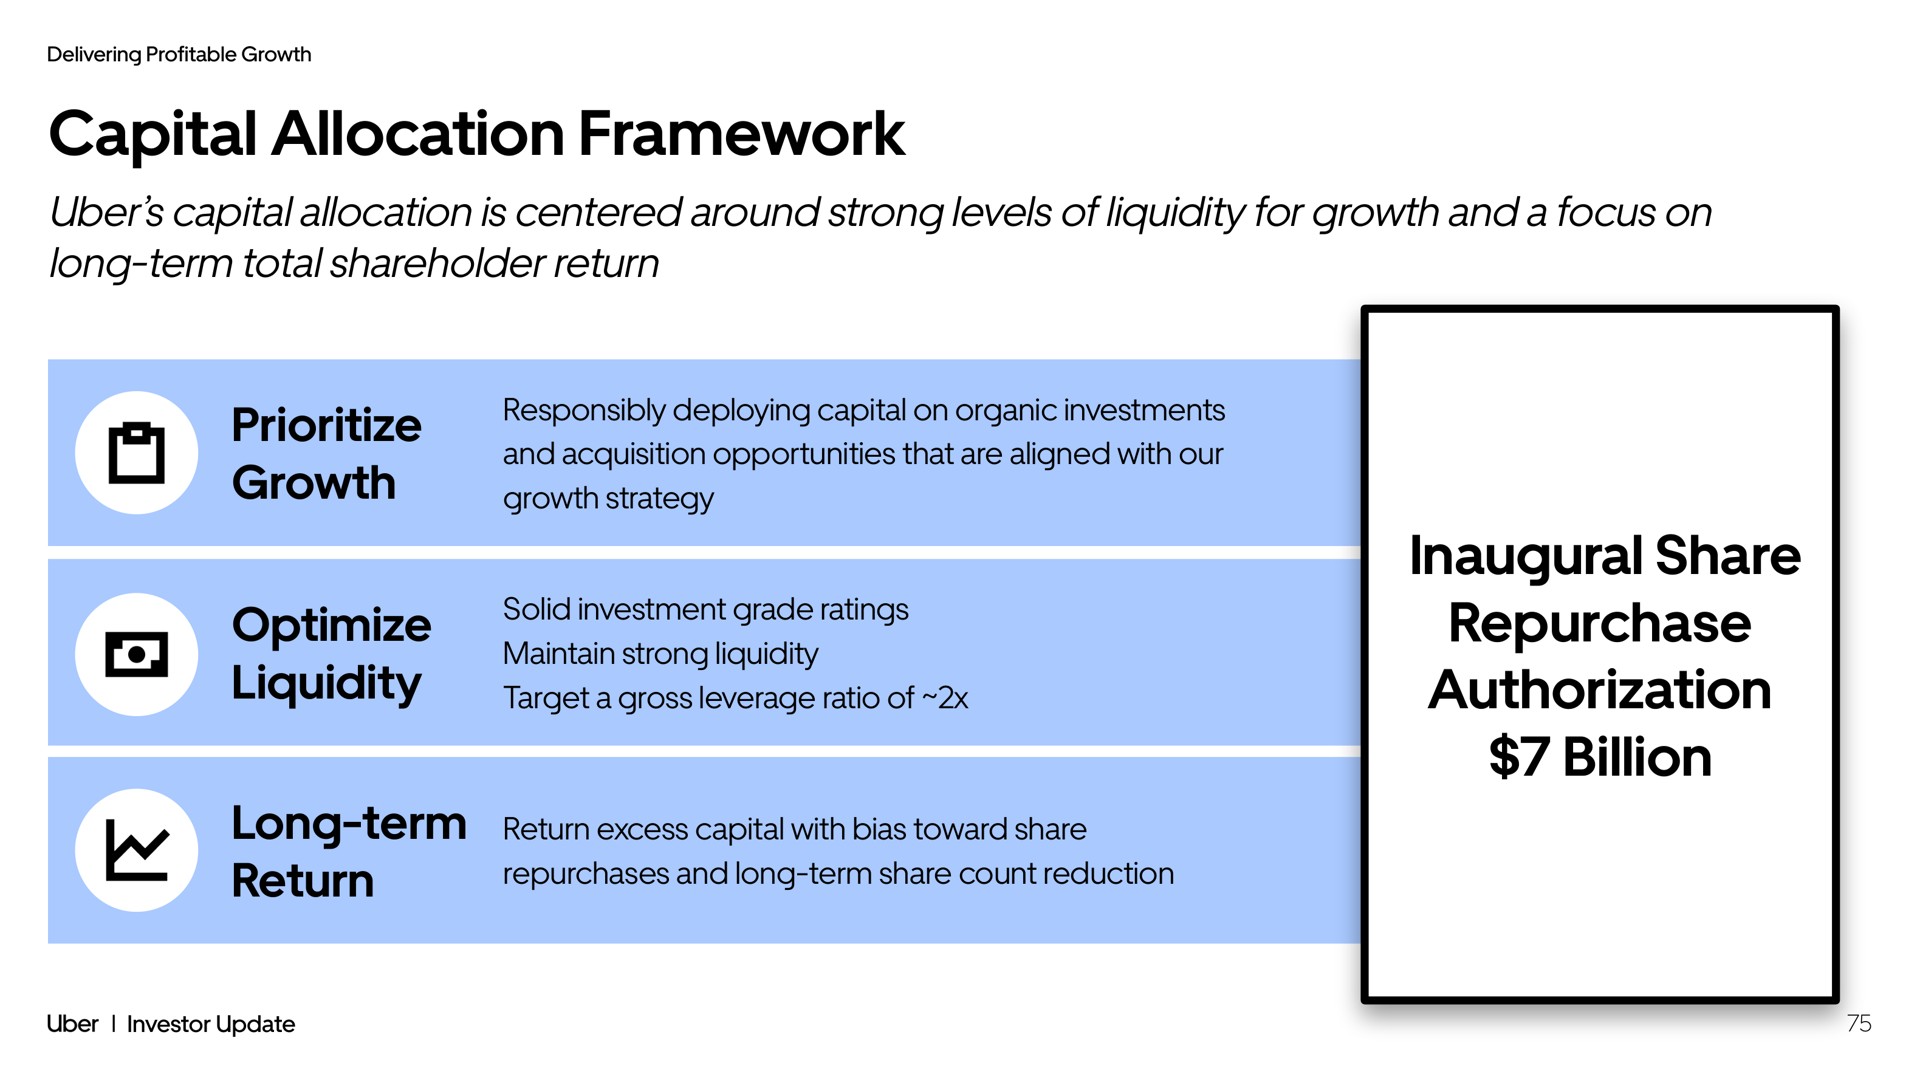 capital allocation framework capital allocation is centered around strong levels of liquidity for growth and a focus on long term total shareholder return growth optimize liquidity long term return inaugural share repurchase authorization billion | Uber